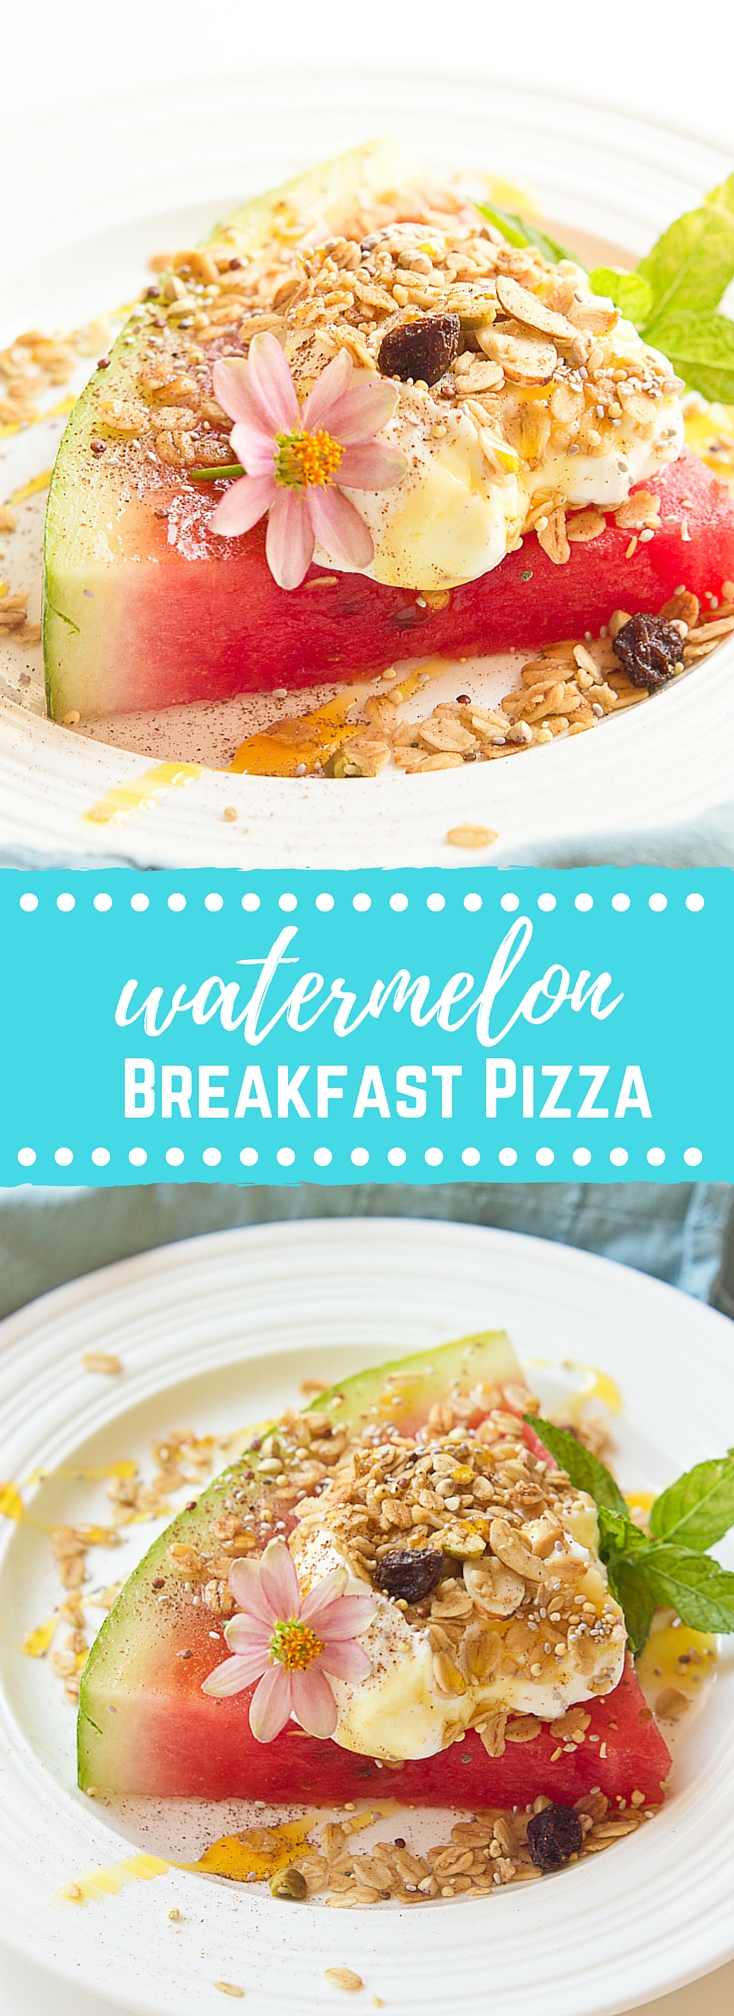 This Watermelon Breakfast Pizza is so it guys! Slice of watermelon, topped with Greek yogurt, seeds, and a drizzle of honey. Make it your own by adding your favorite toppings. The possibilities are endless. 